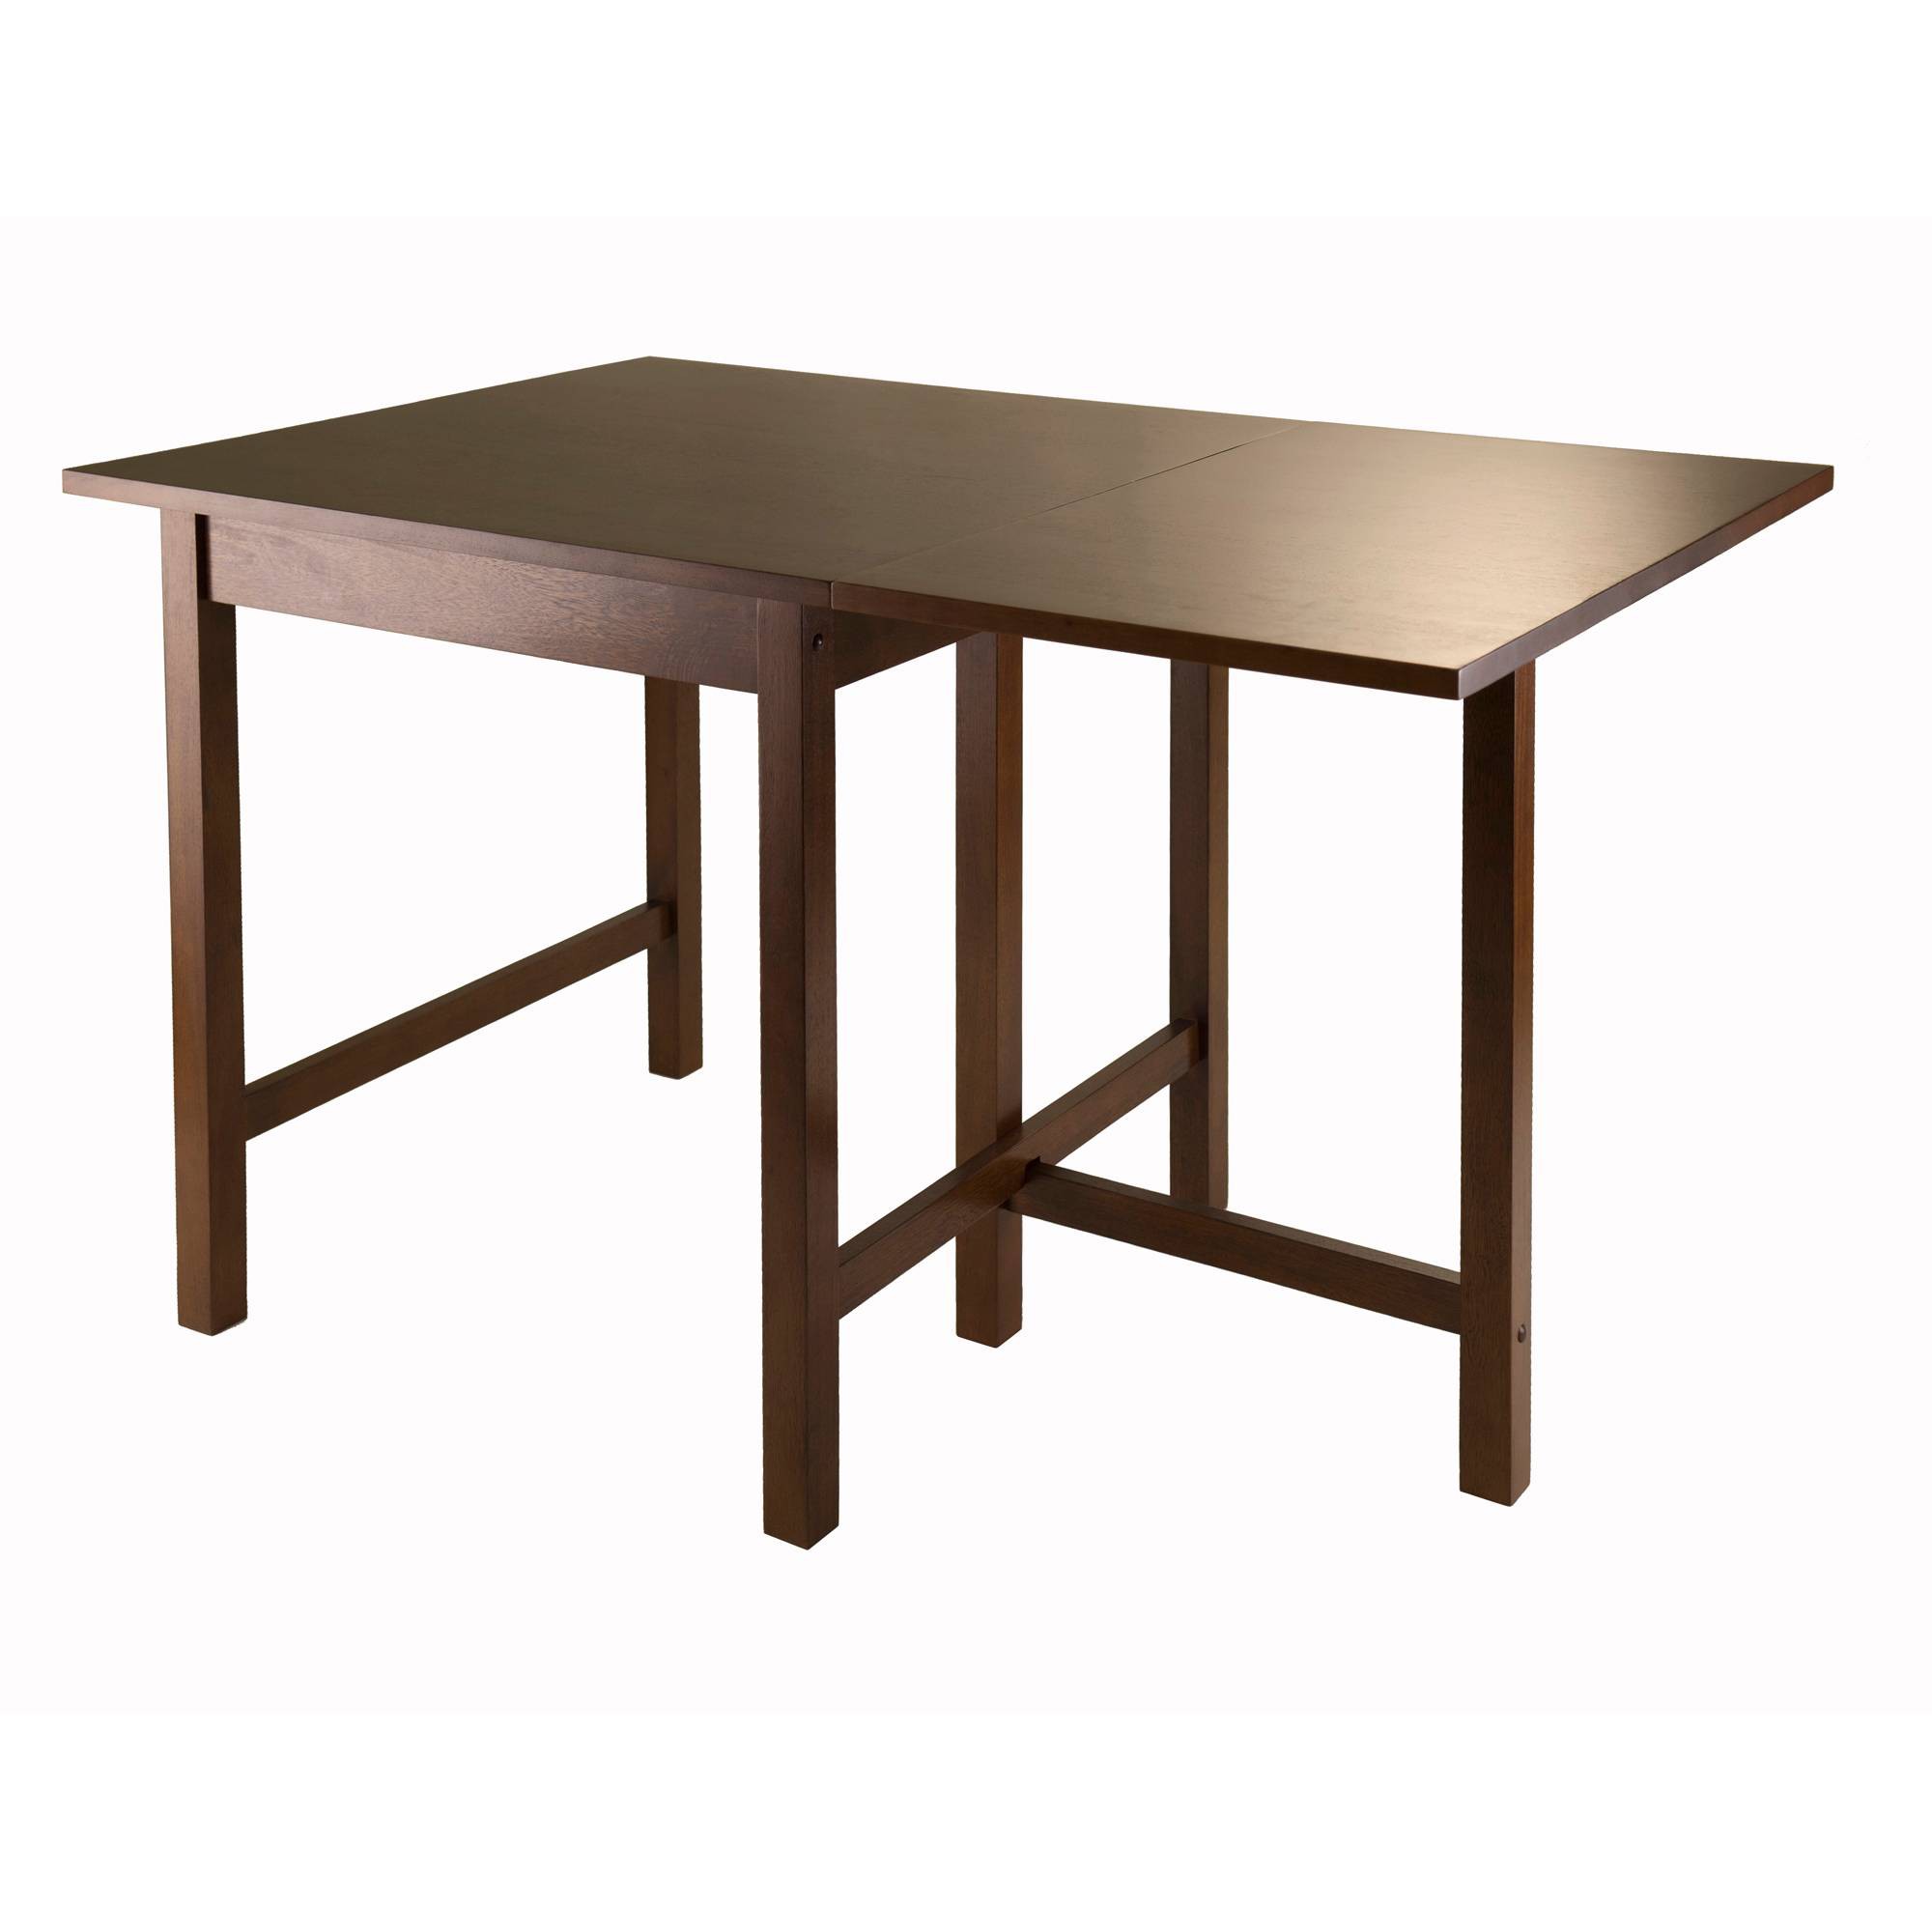 Dropleaf Dining Table Wood/Toasted Walnut - Winsome, Brown